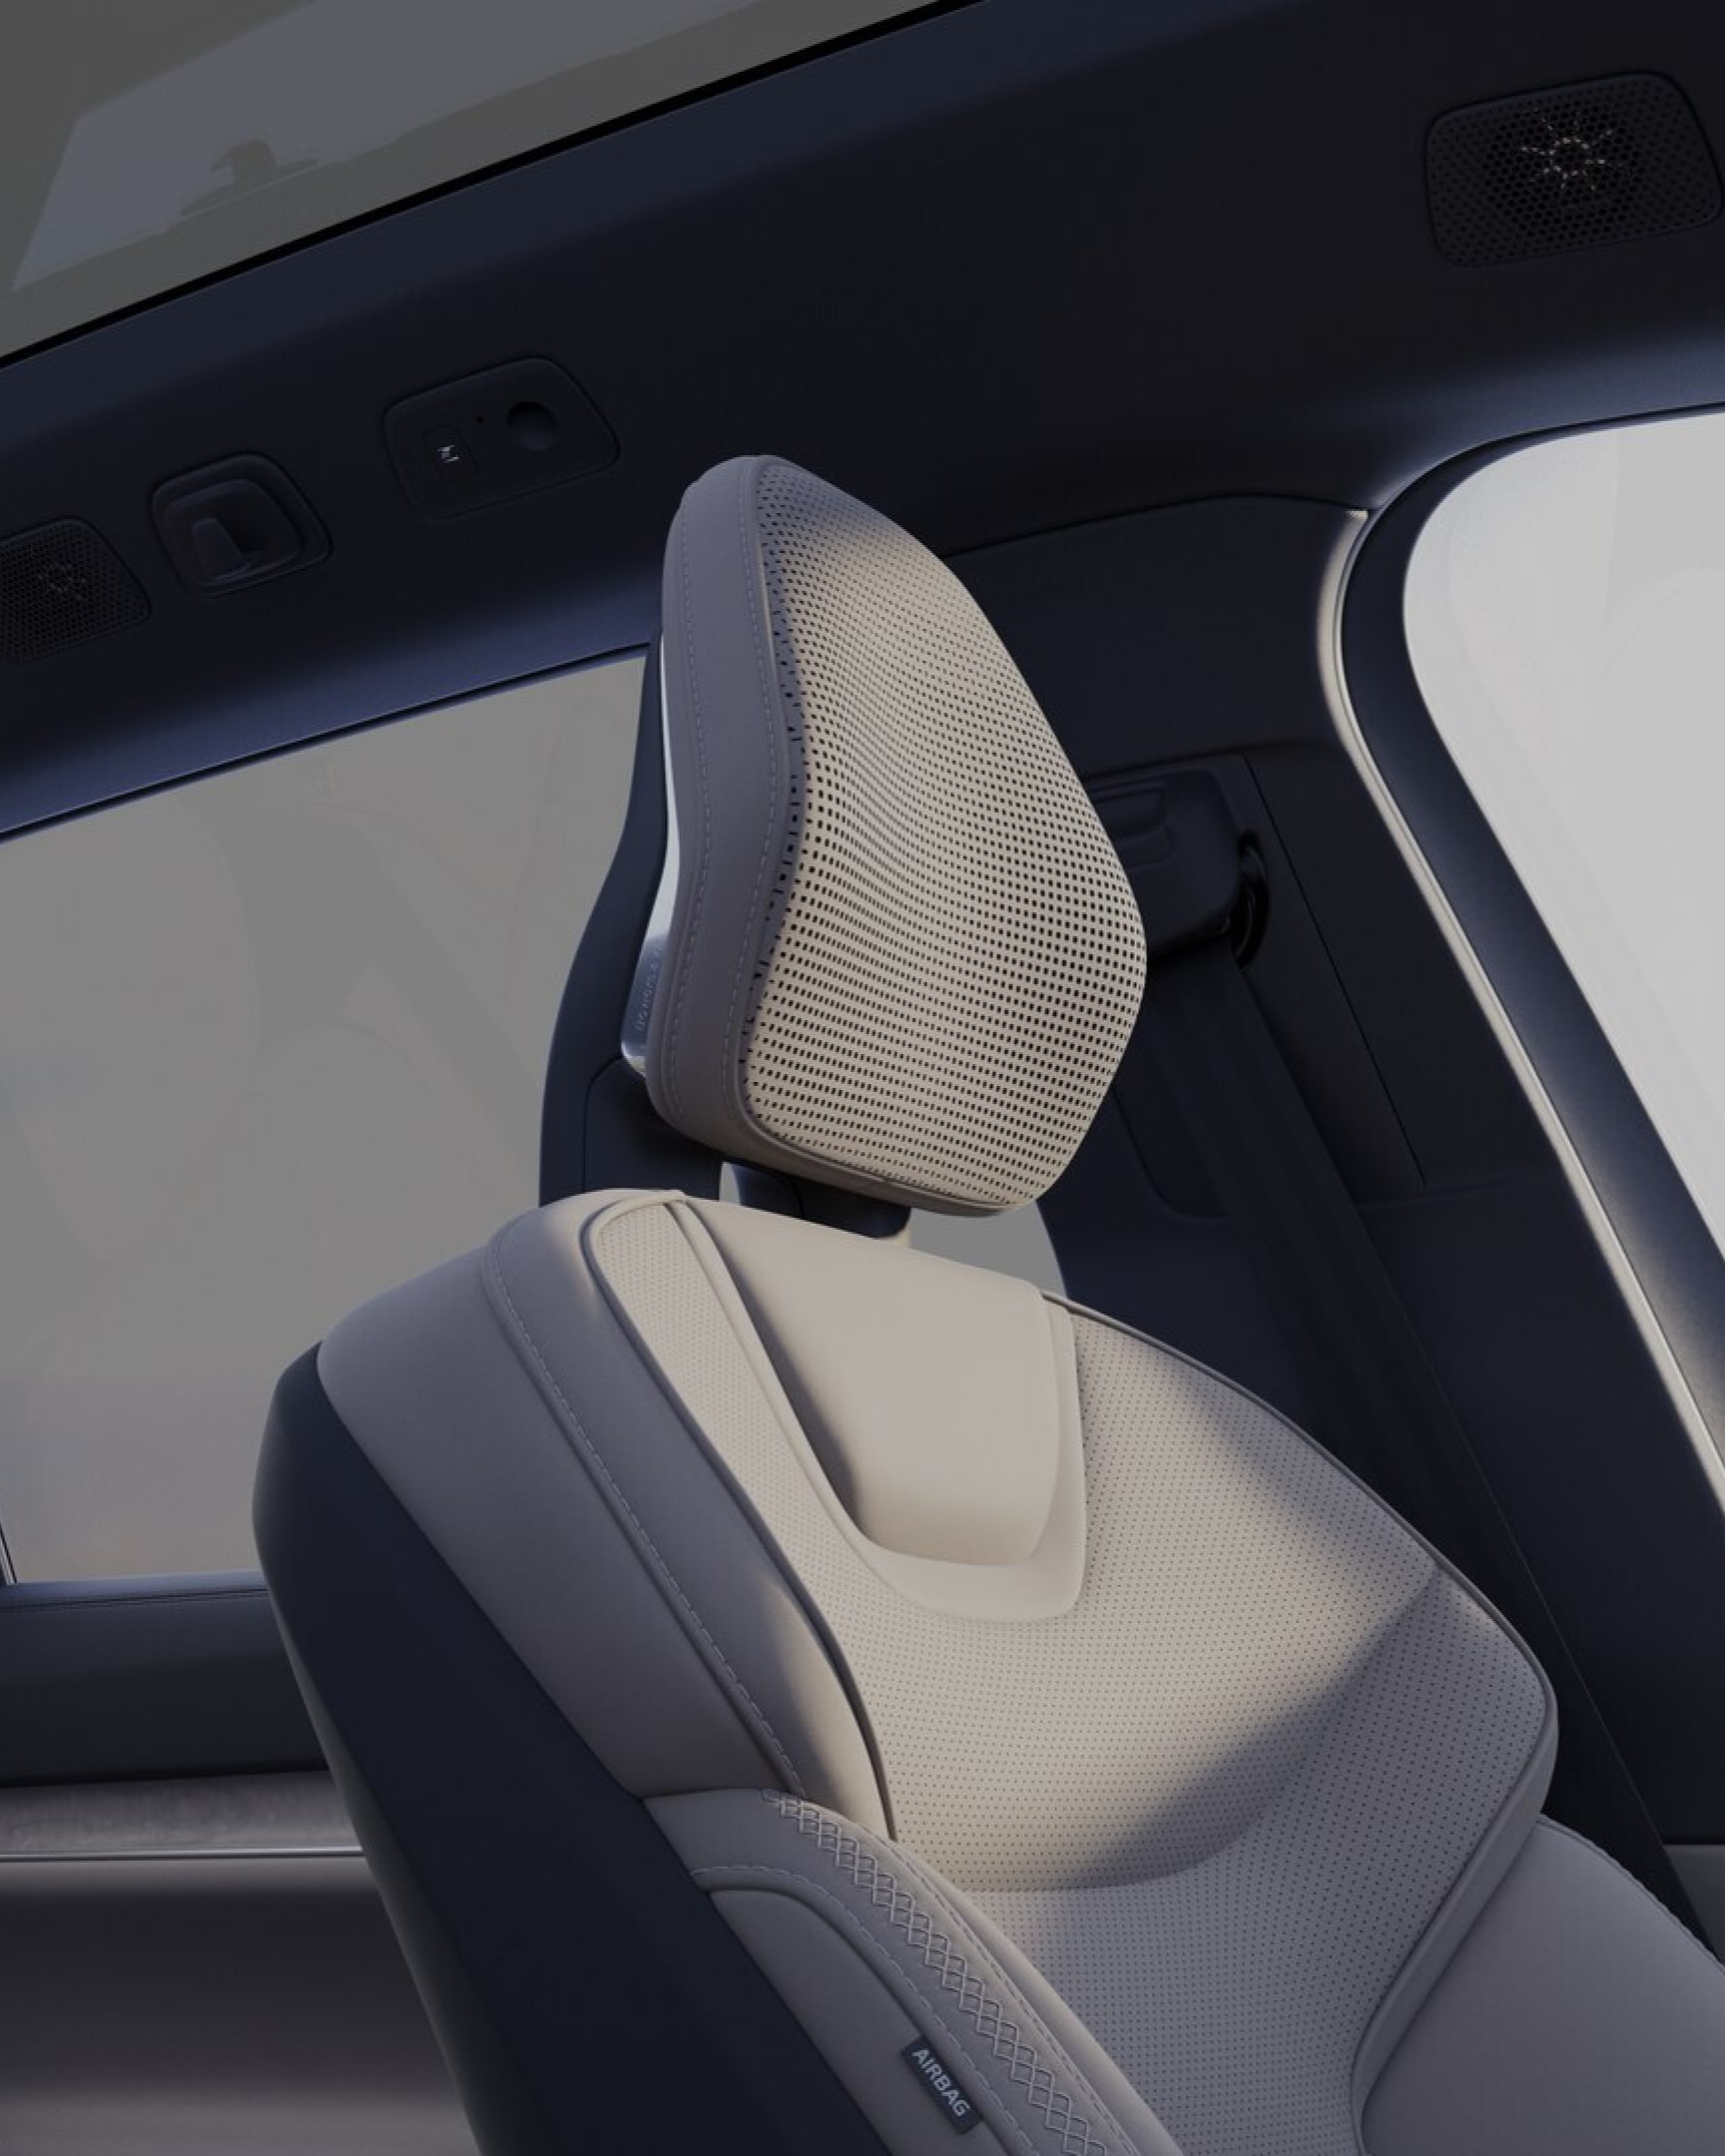 Seats and headrests in a Volvo EX90.